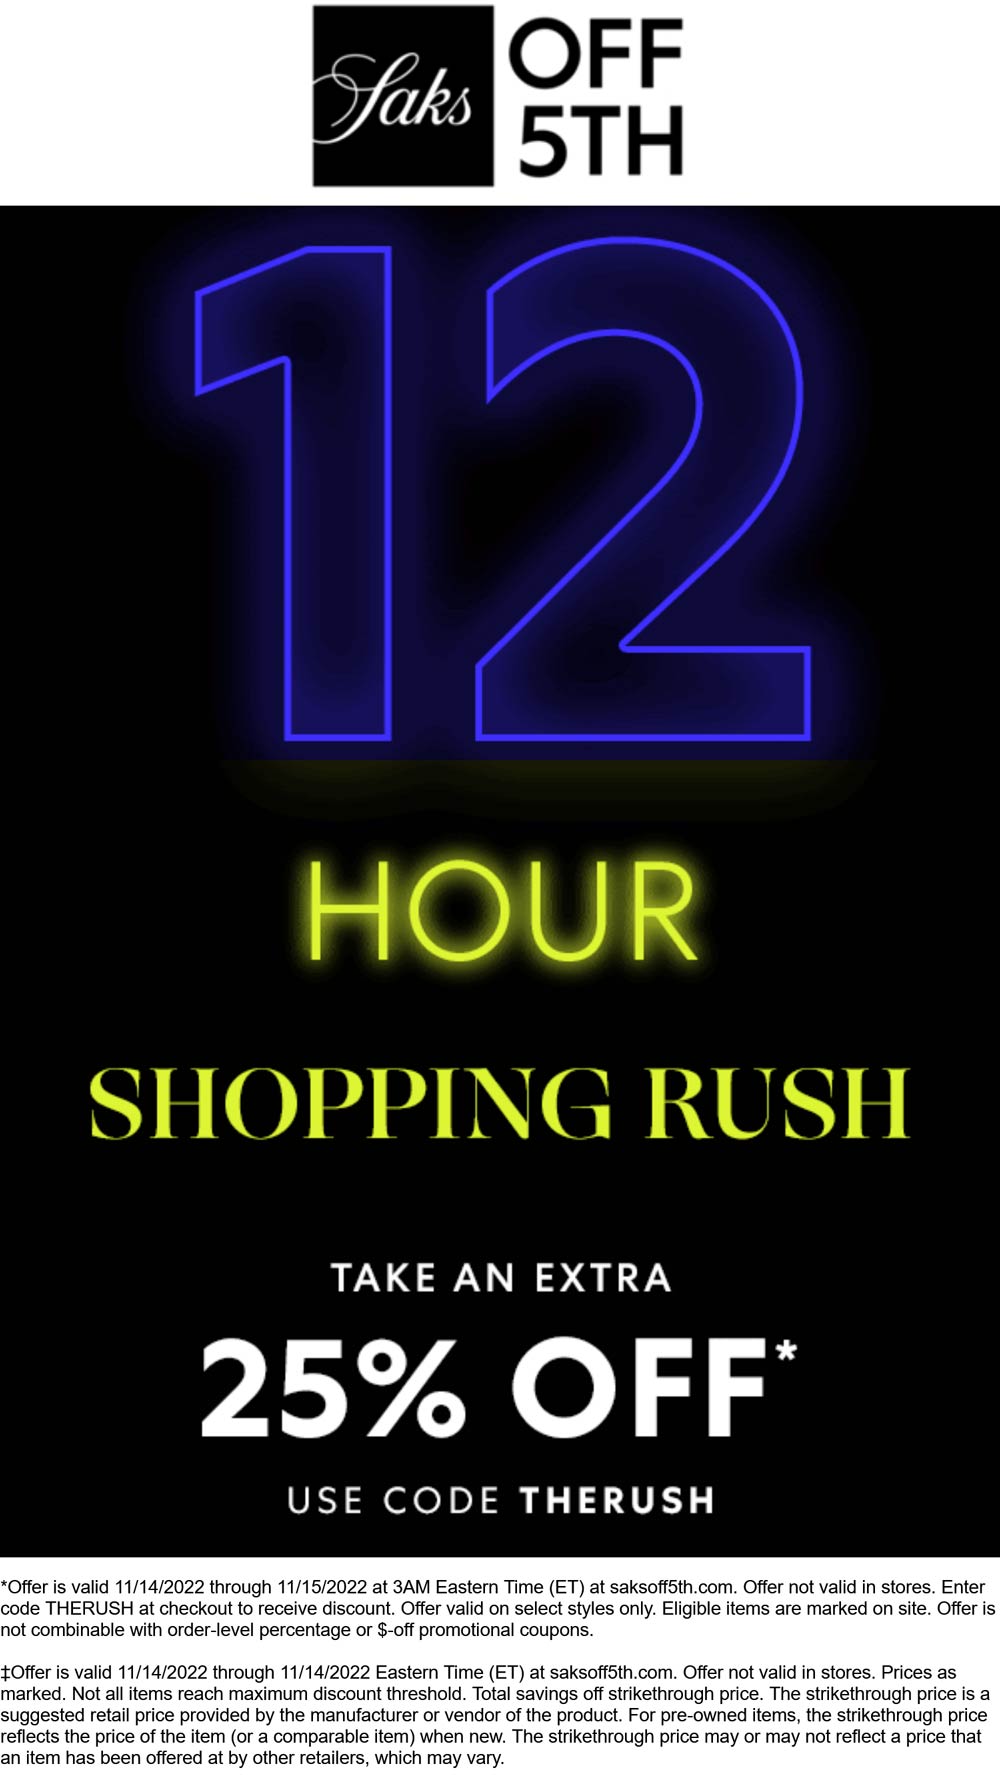 OFF 5TH stores Coupon  Extra 25% off online today at Saks OFF 5TH via promo code THERUSH #off5th 